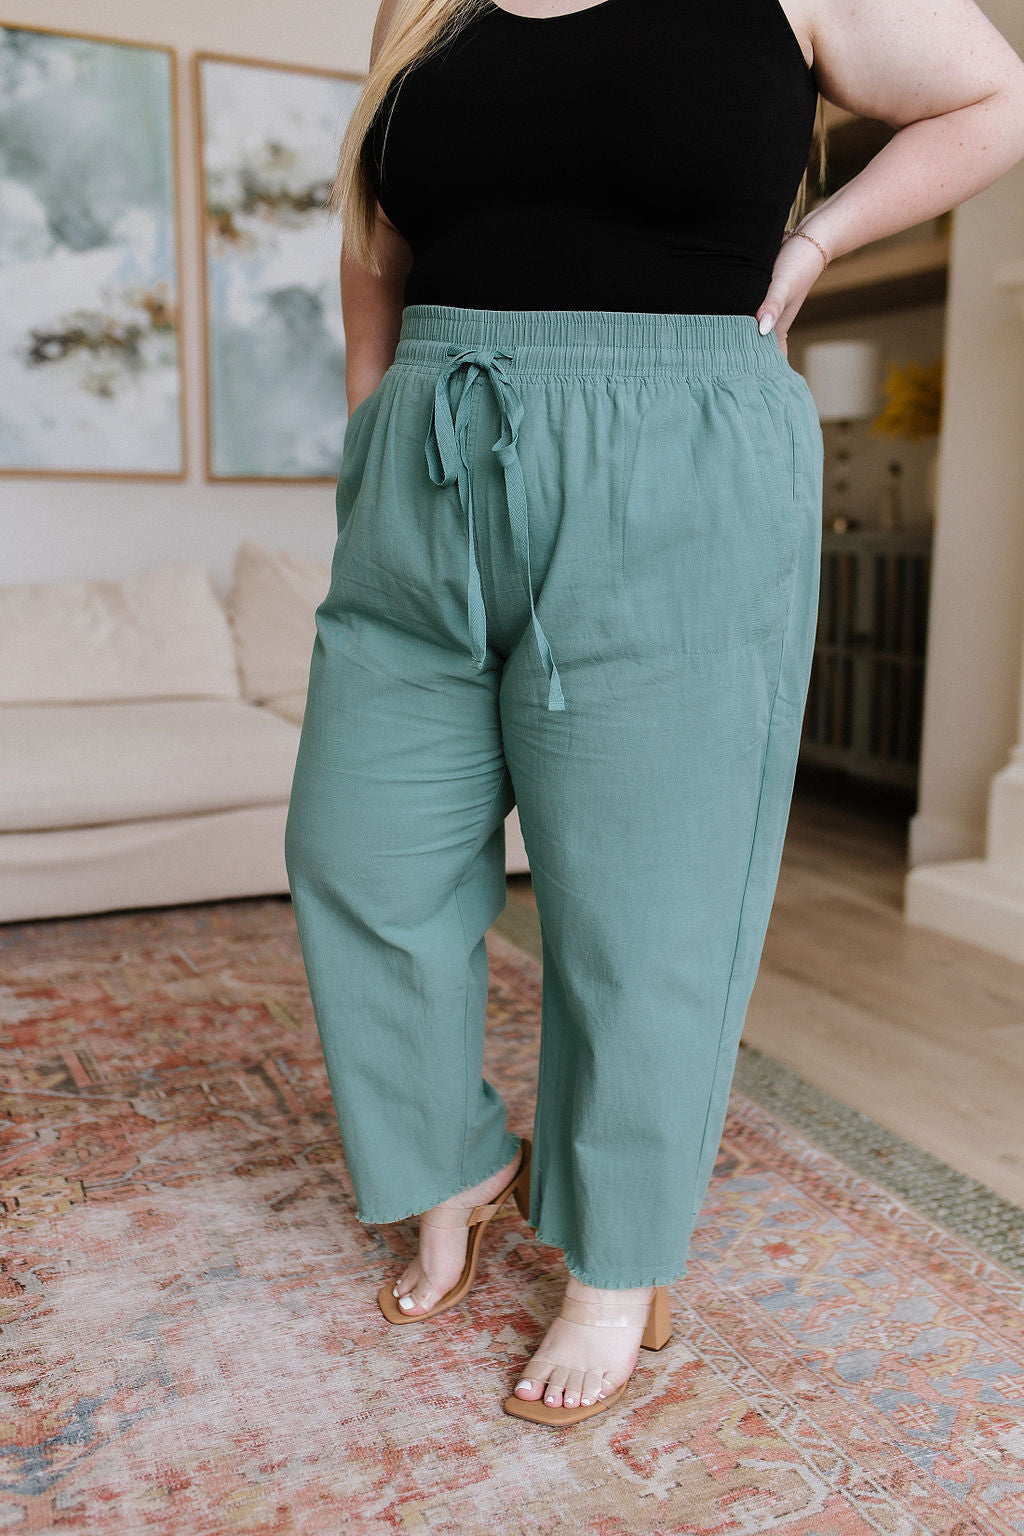 Sample Love Me Dearly High Waisted Pants in Jade